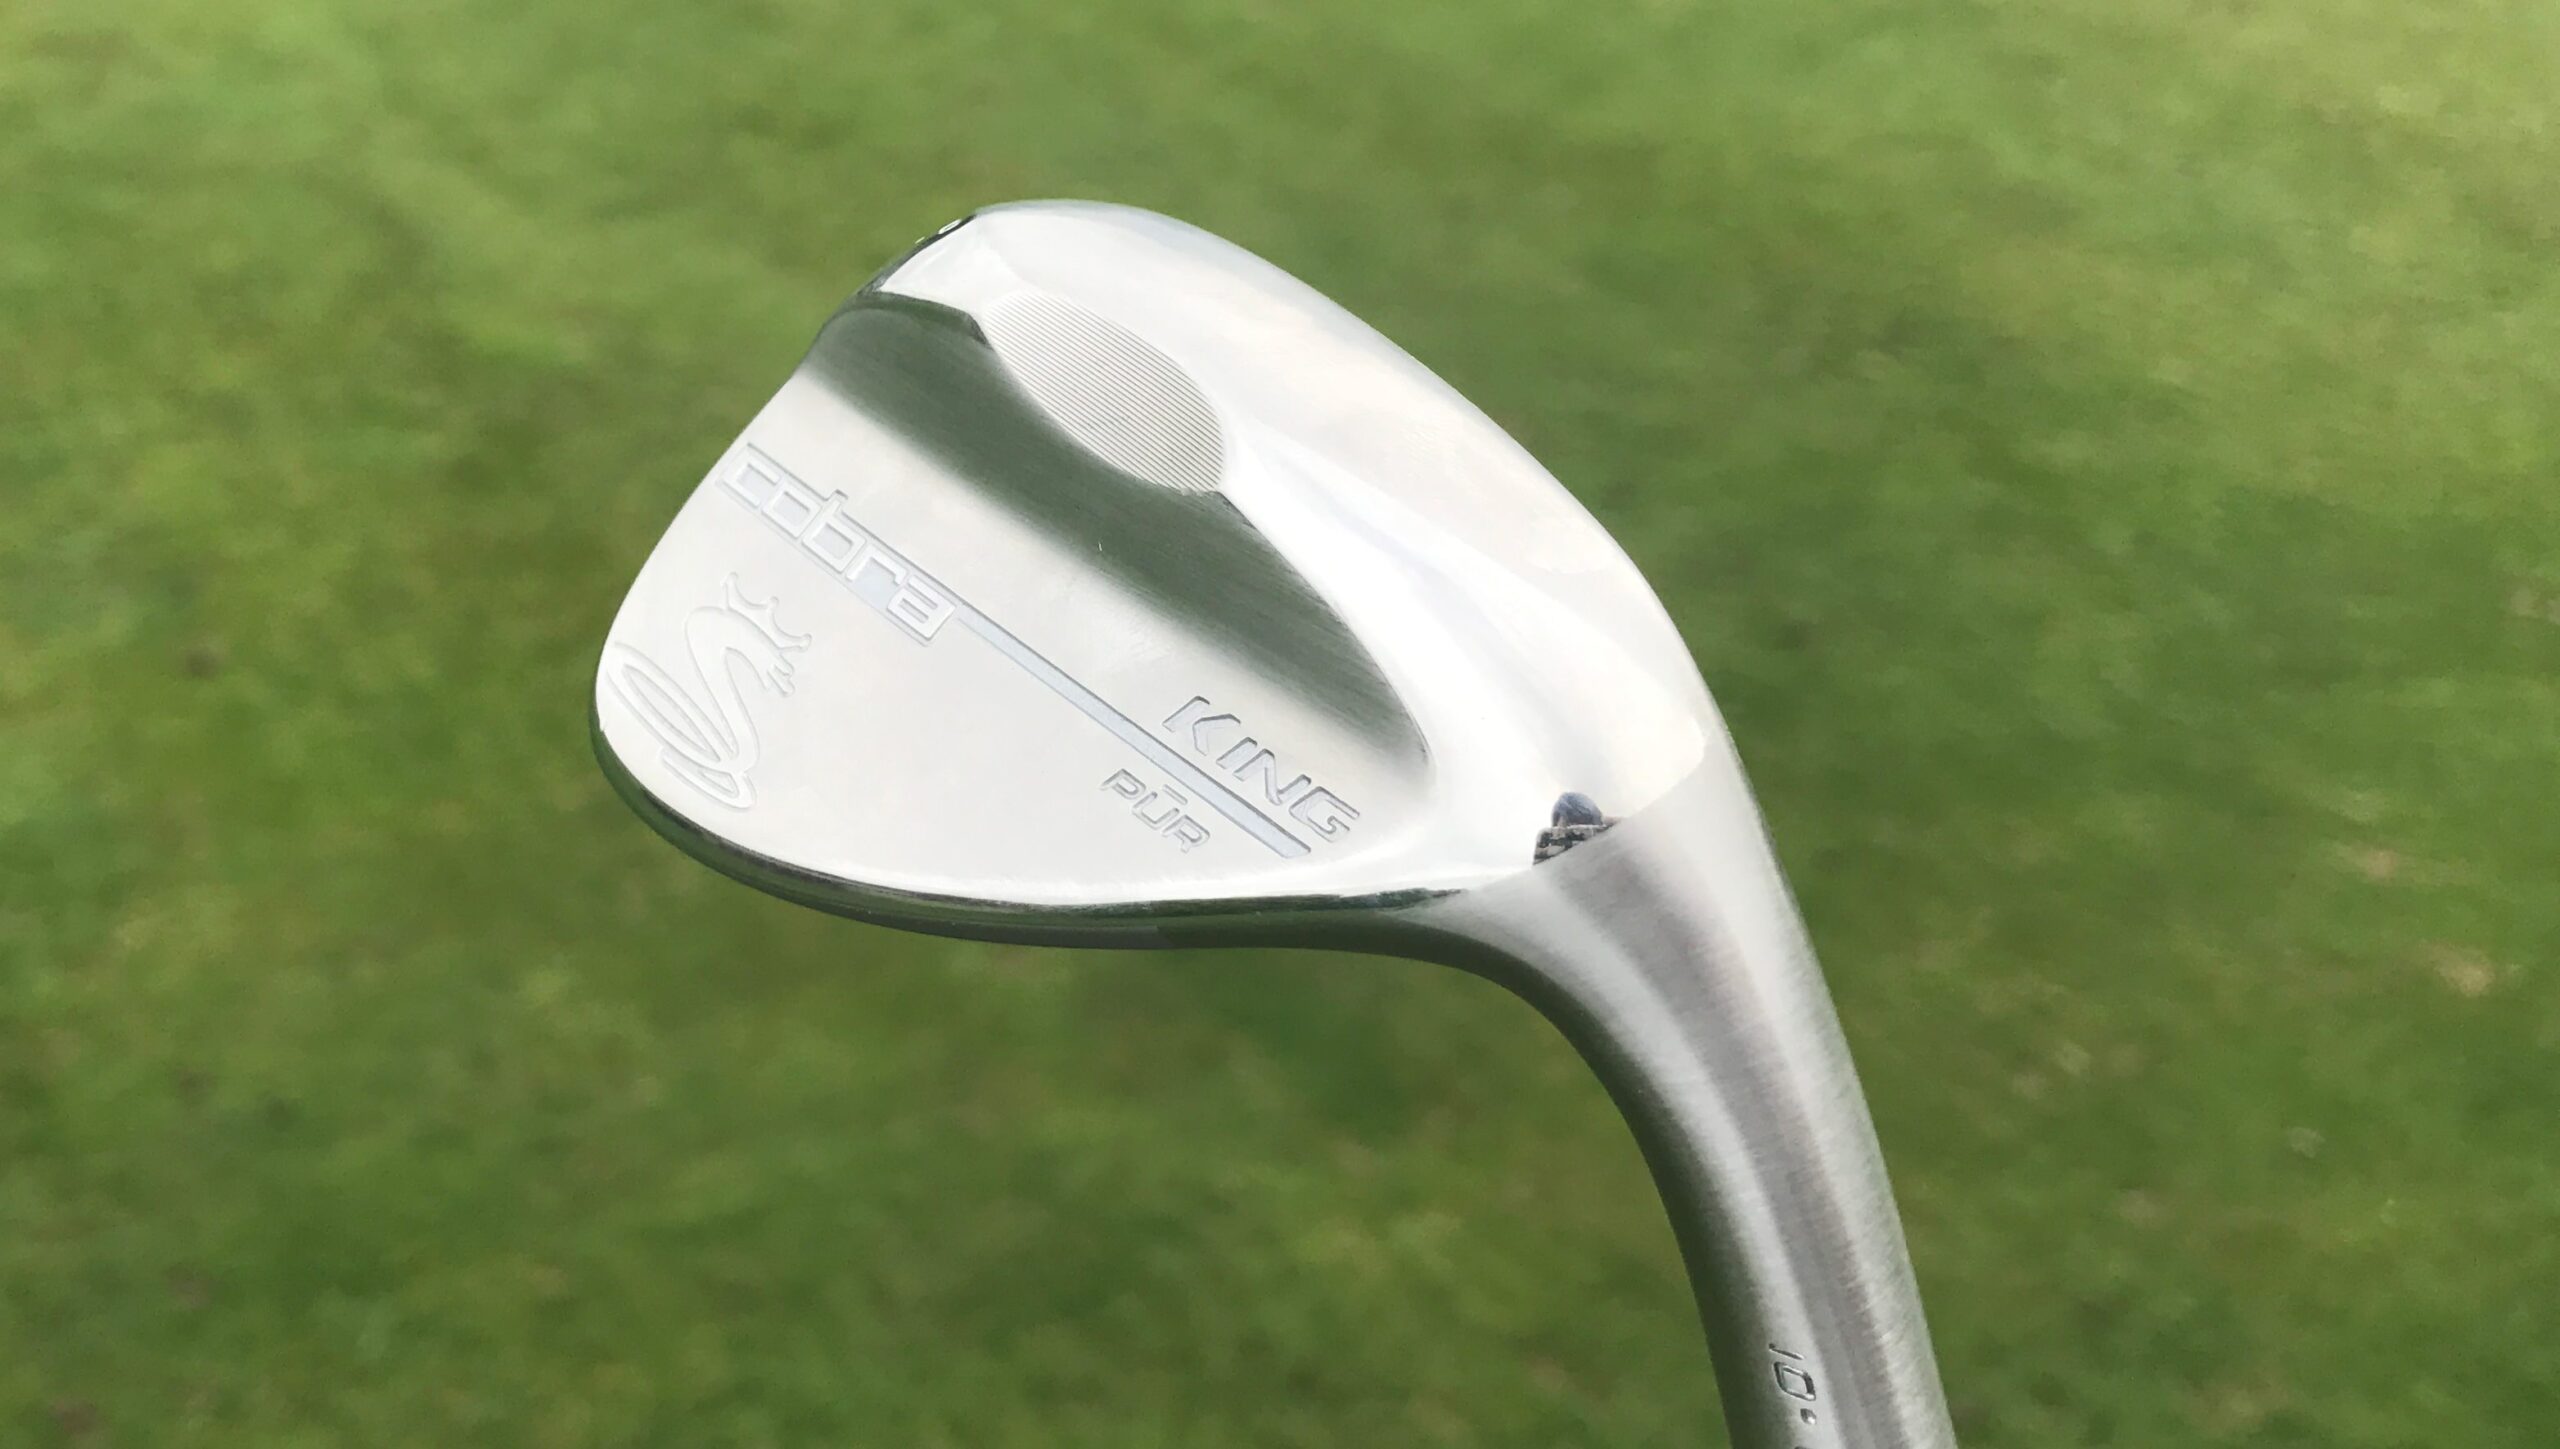 Cobra King Pur Wedges review